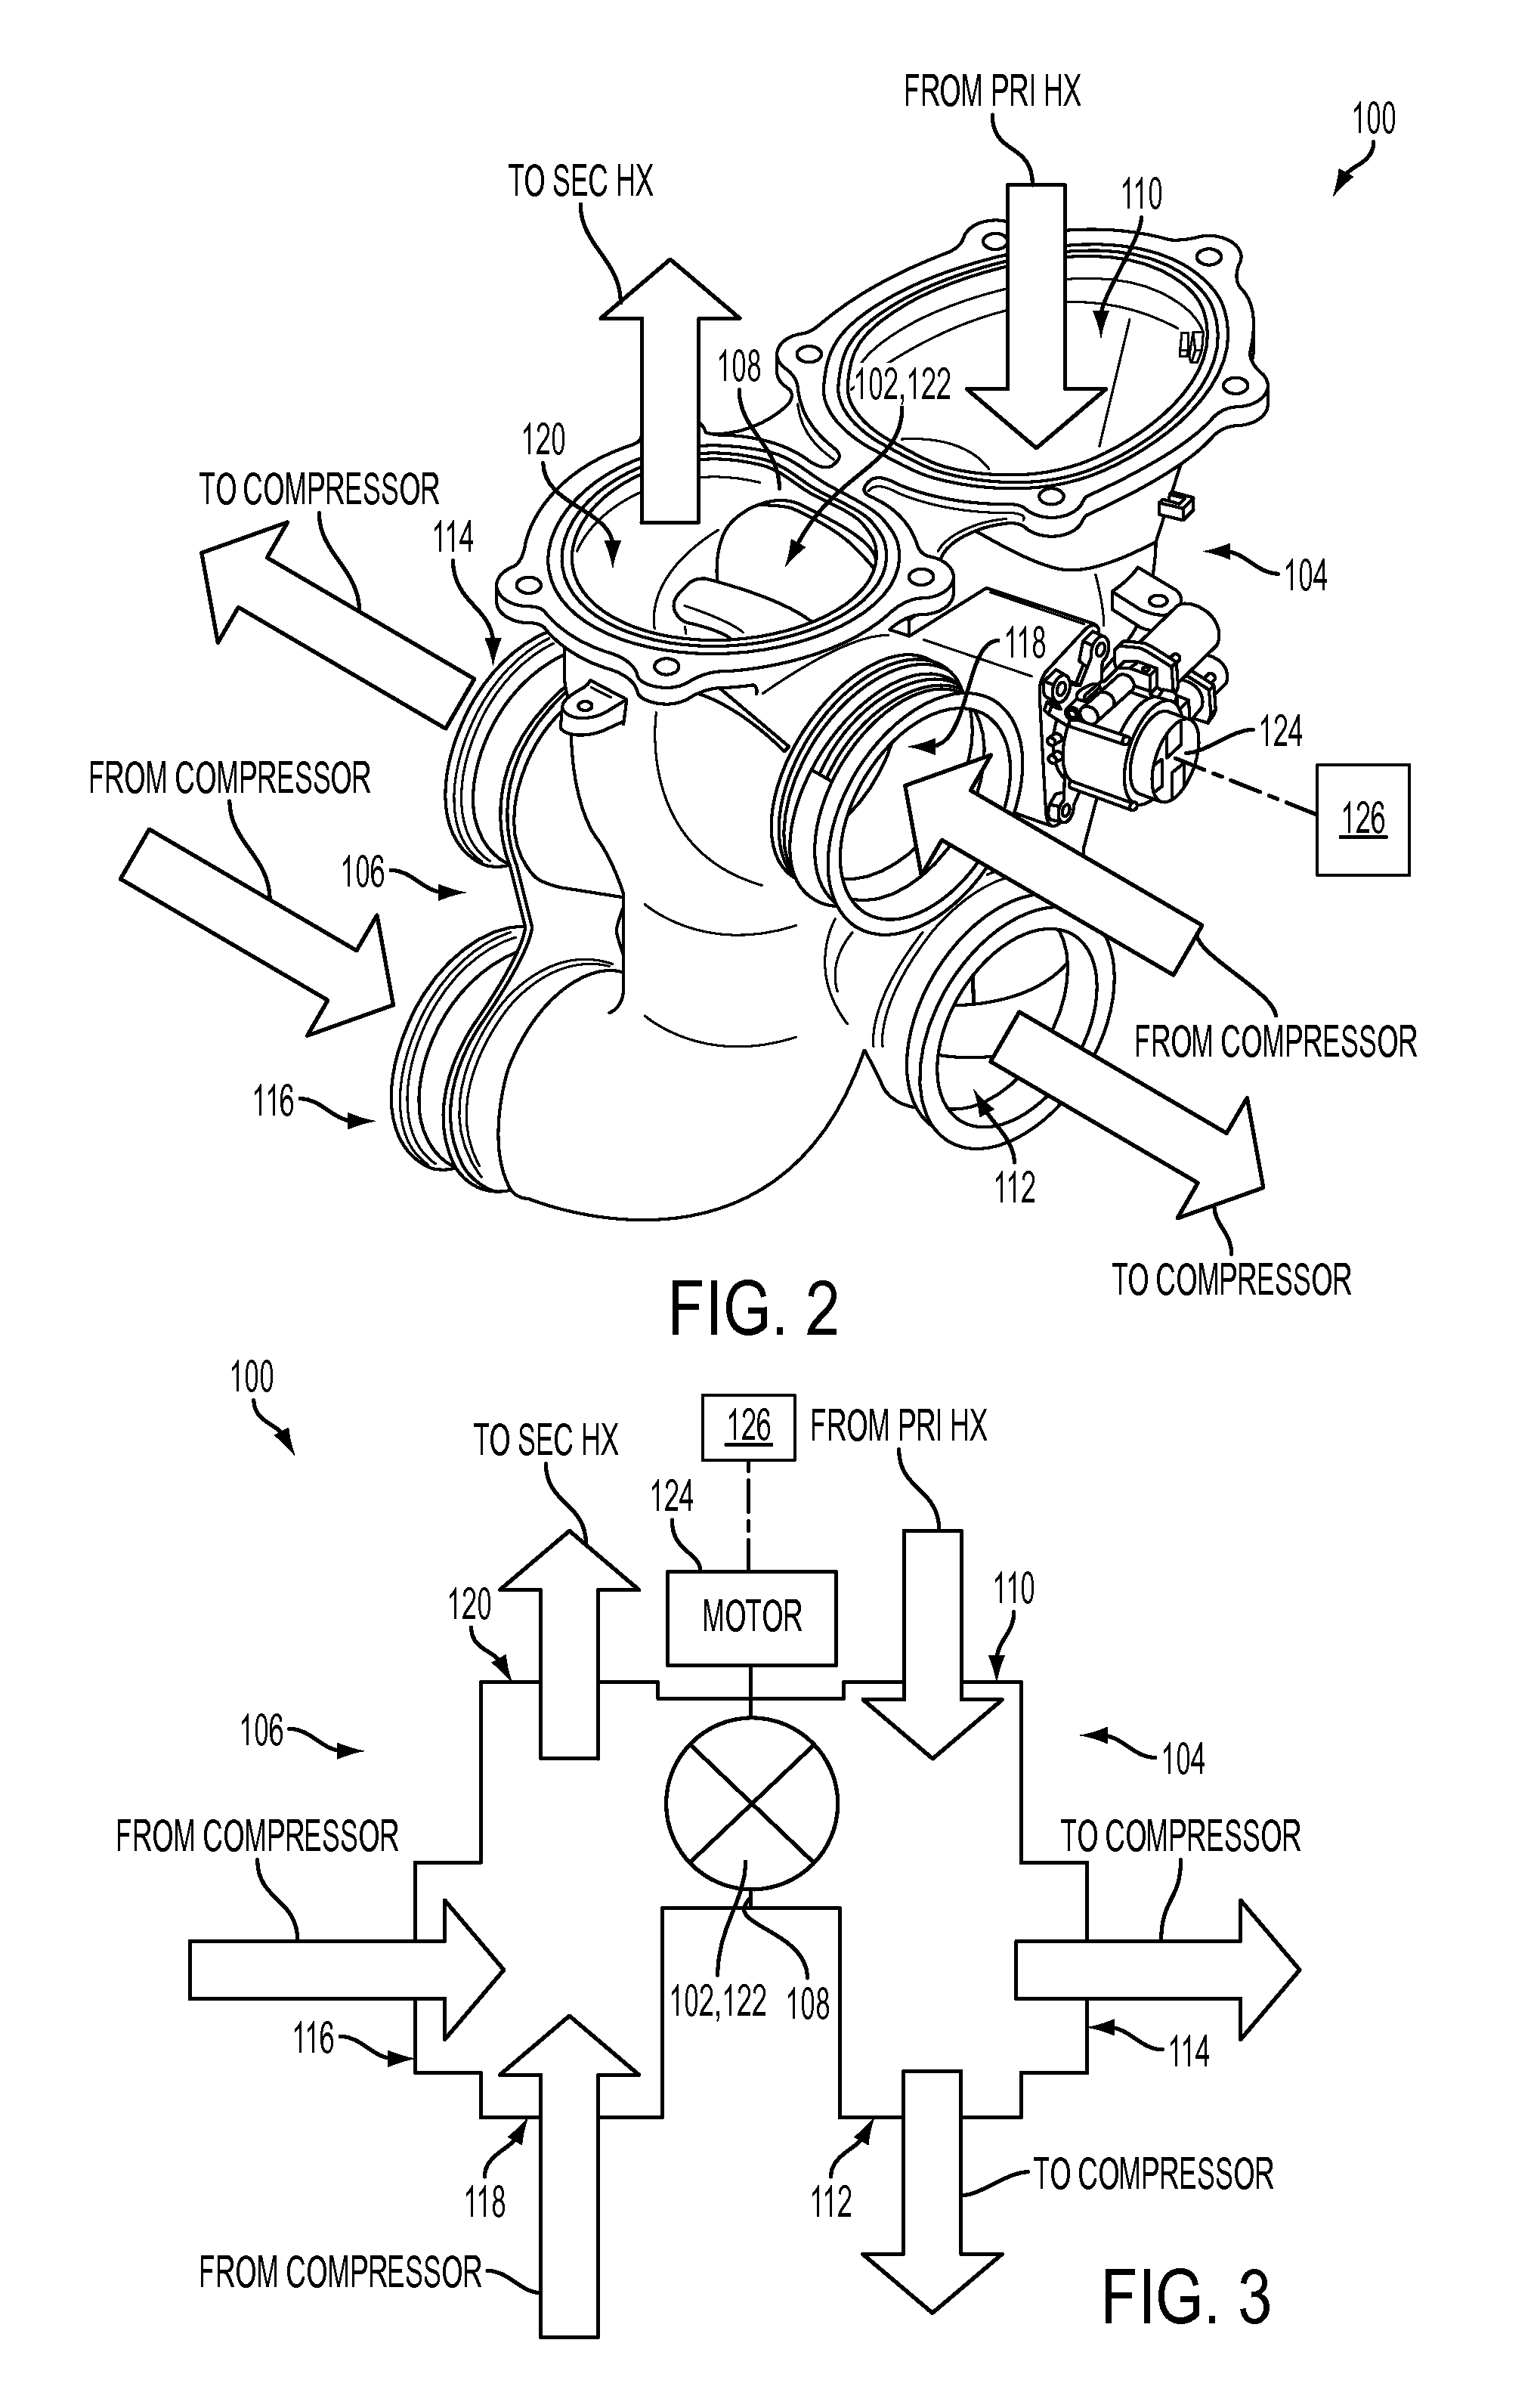 Multi-port compressor manifold with integral bypass valve